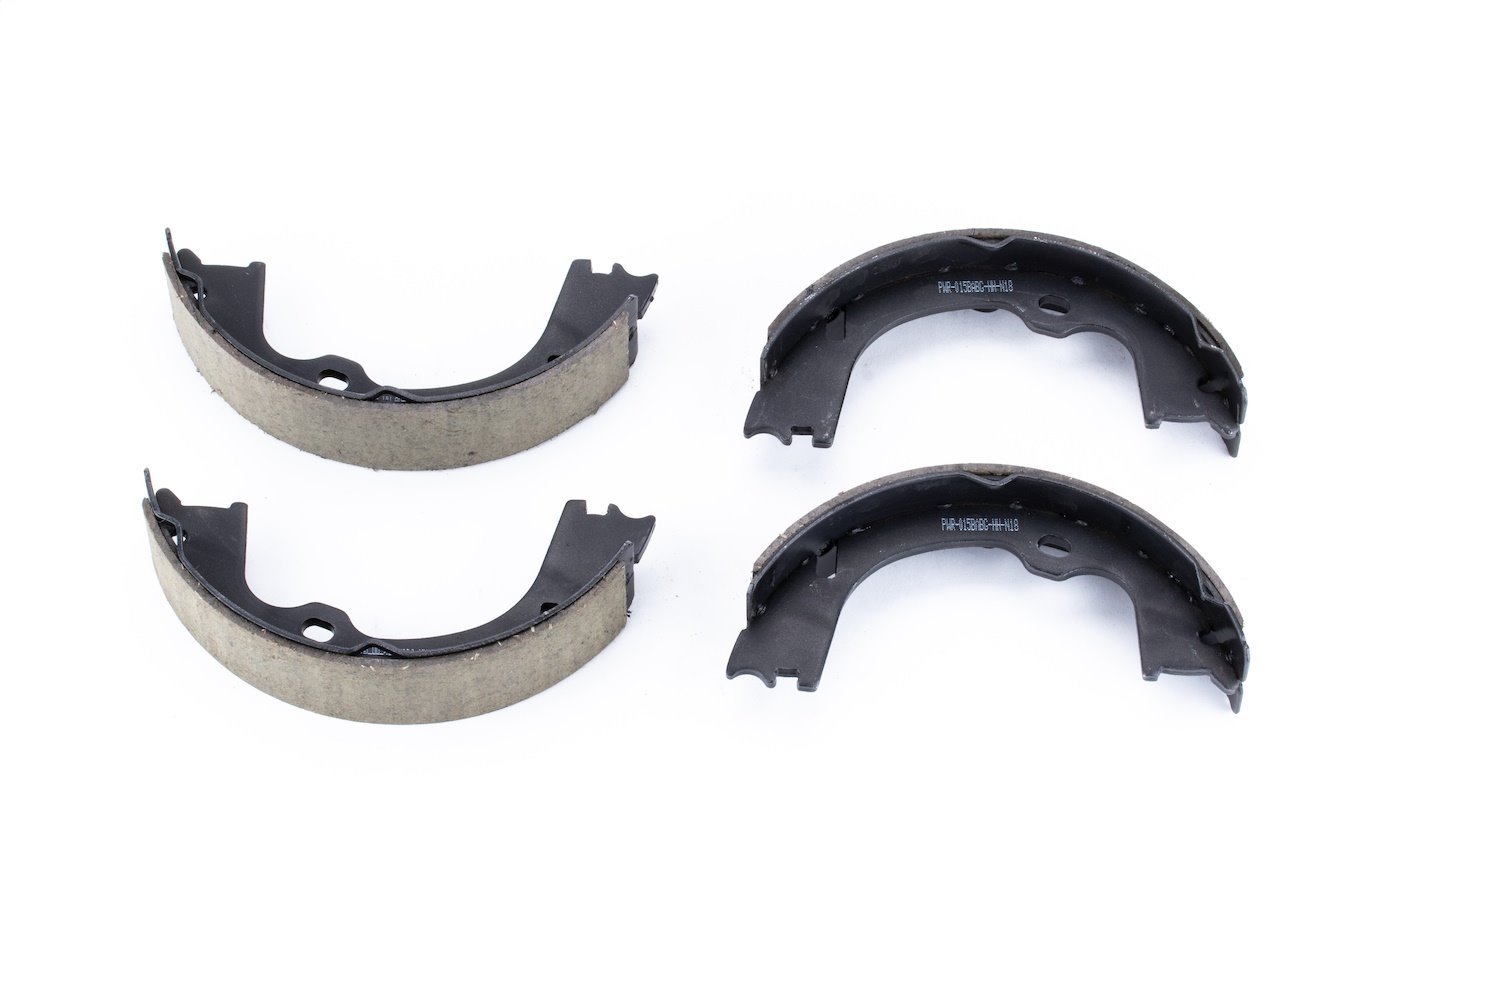 NEW SHOES Rear 2013-09 CHEVROLET Express 2500/2013-09 CHEVROLET Express 3500/2010-09 CHEVROLET Silve